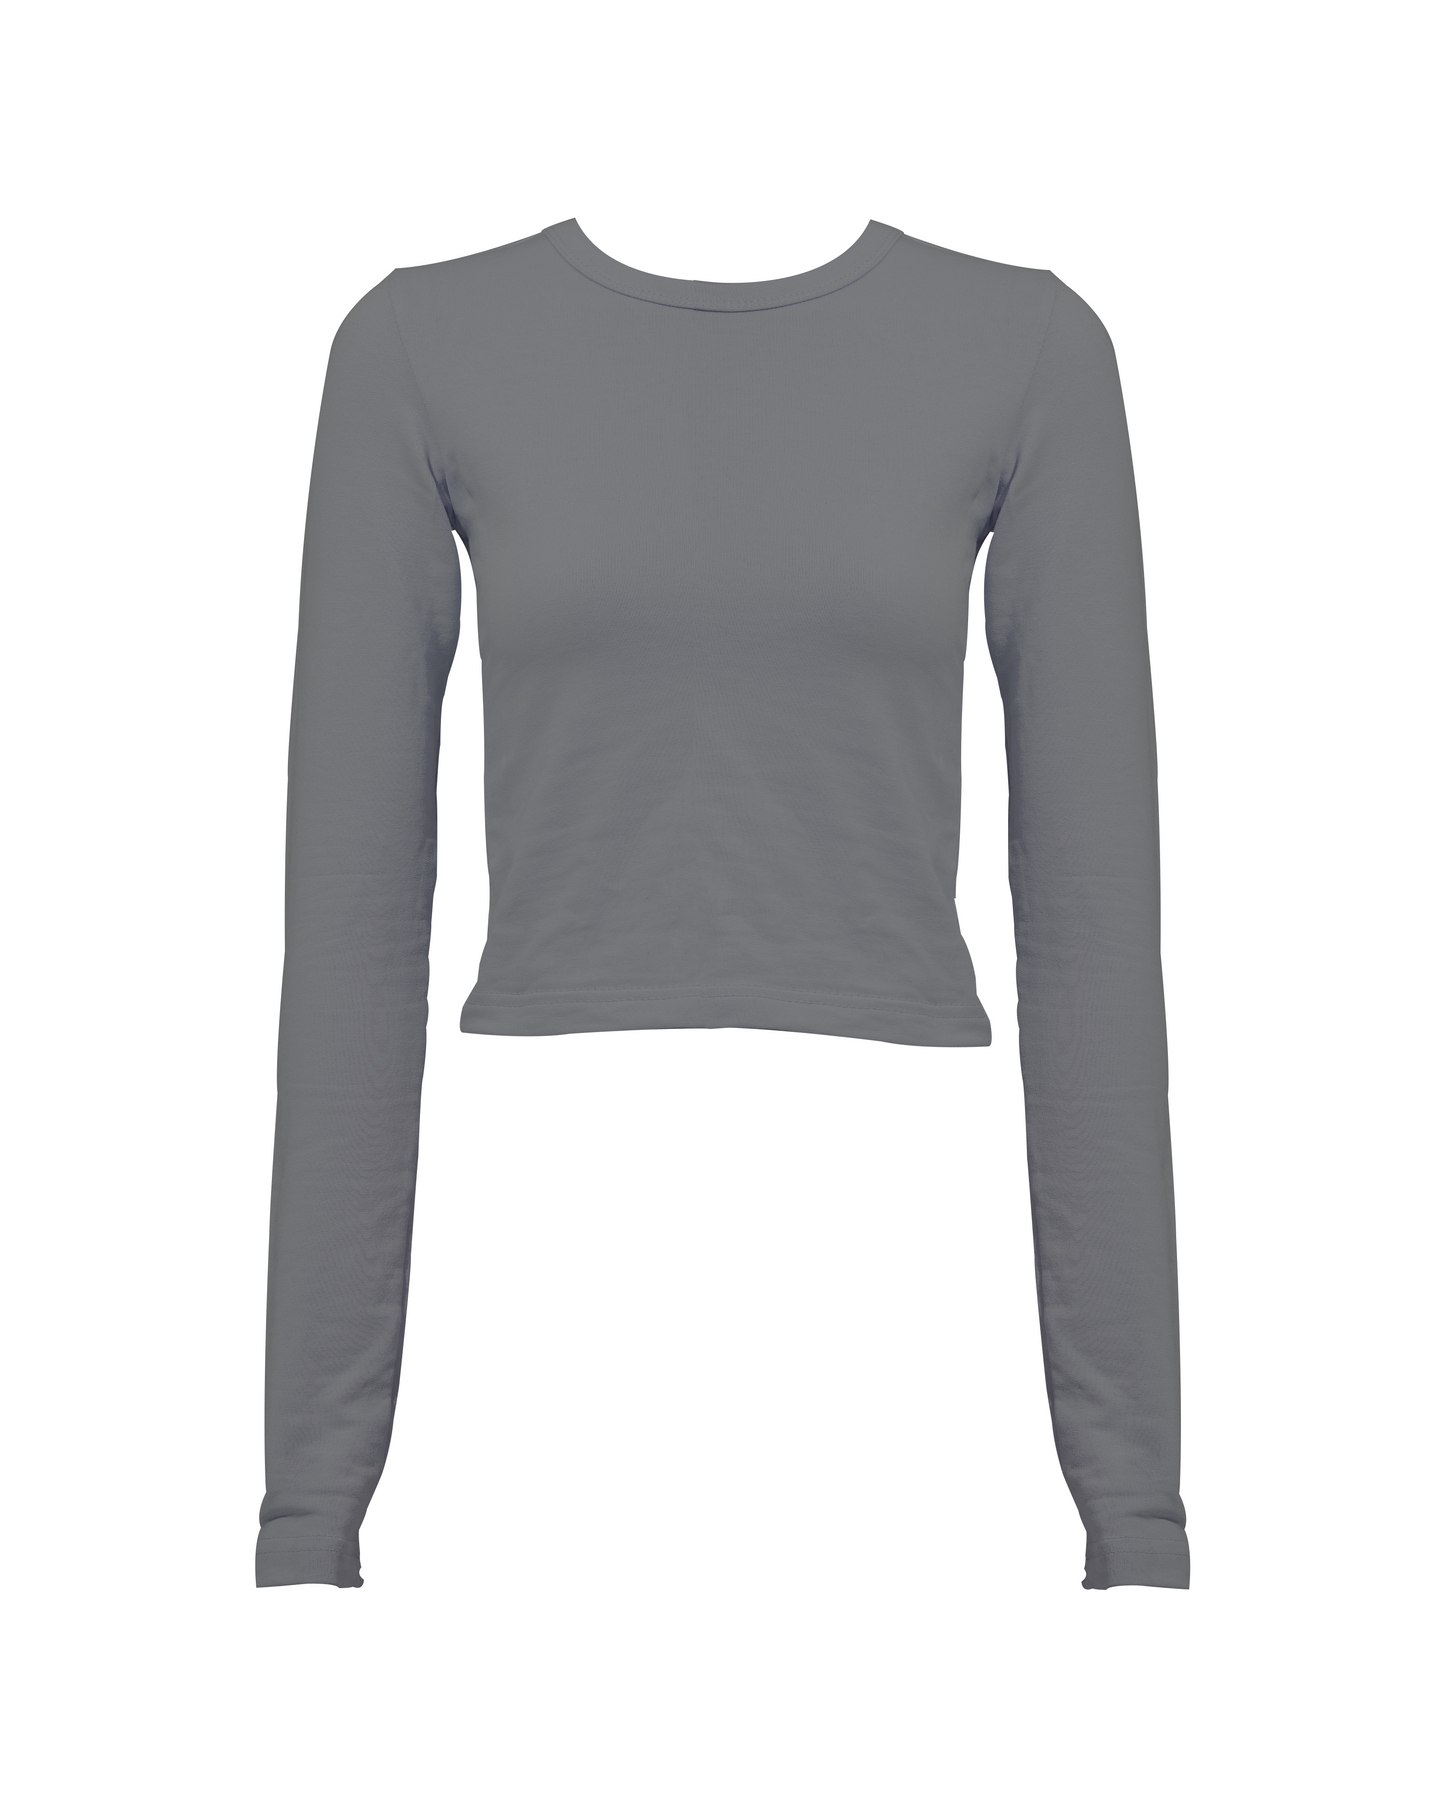 GREY COTTON - LONG SLEEVES TOP